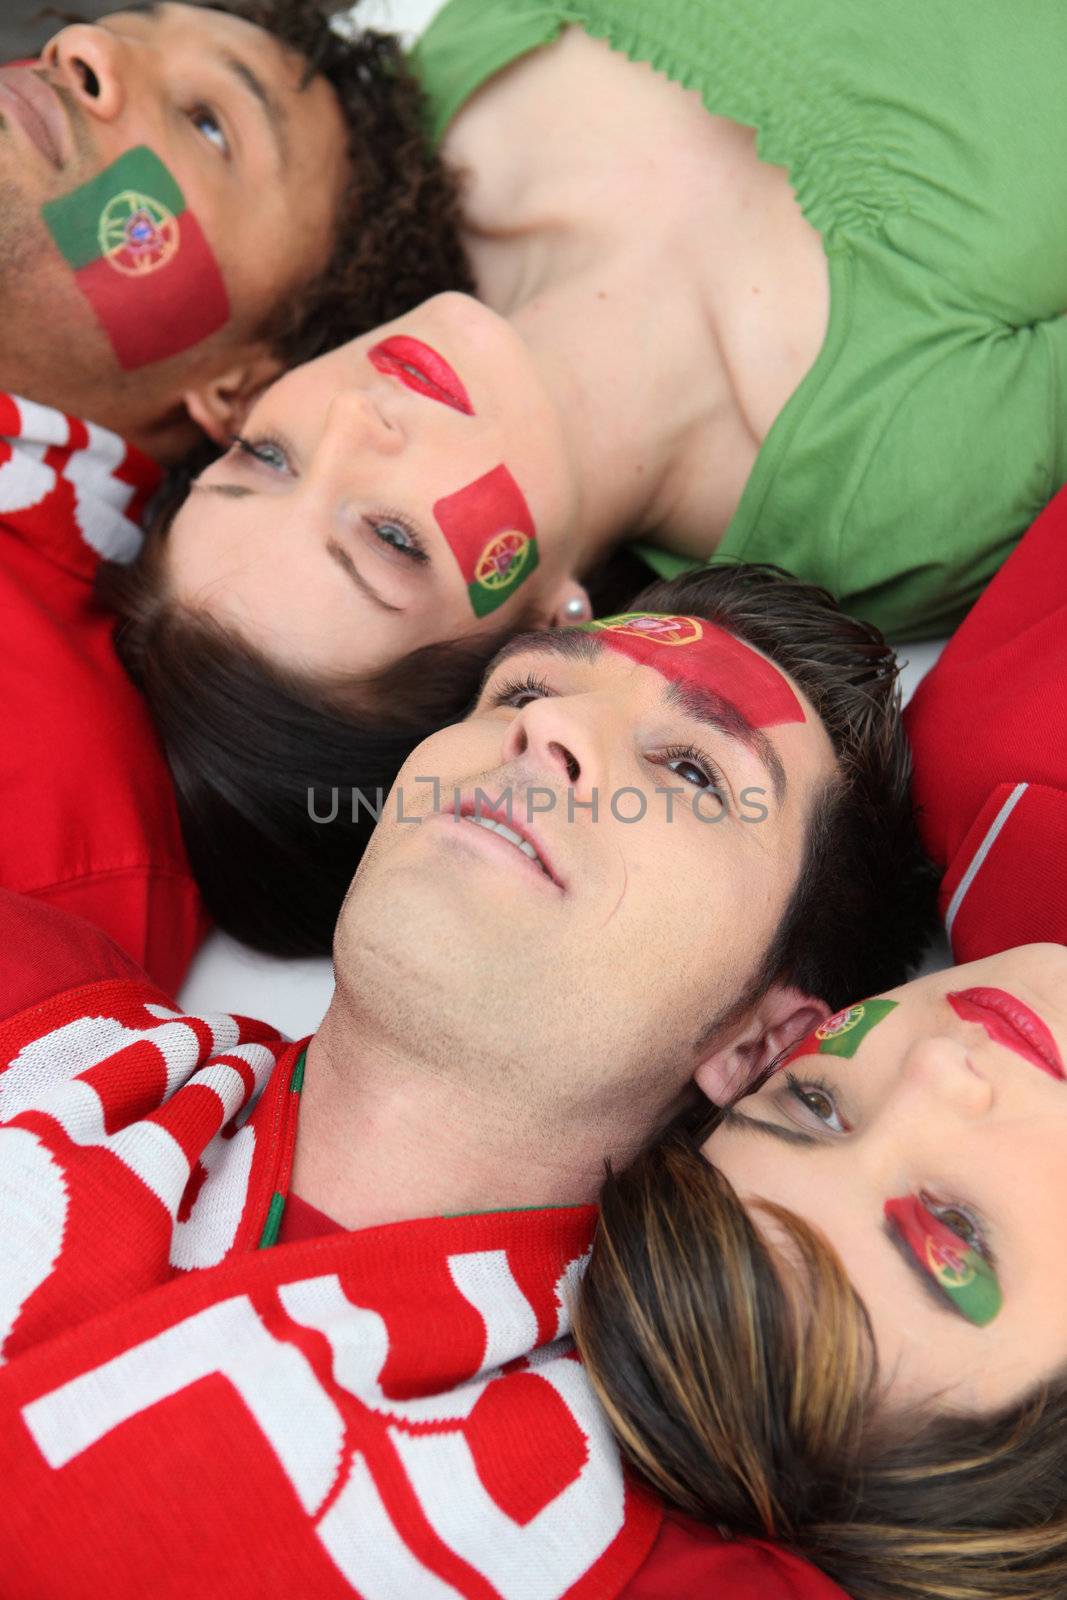 Supporters of Portugal lying on the floor by phovoir